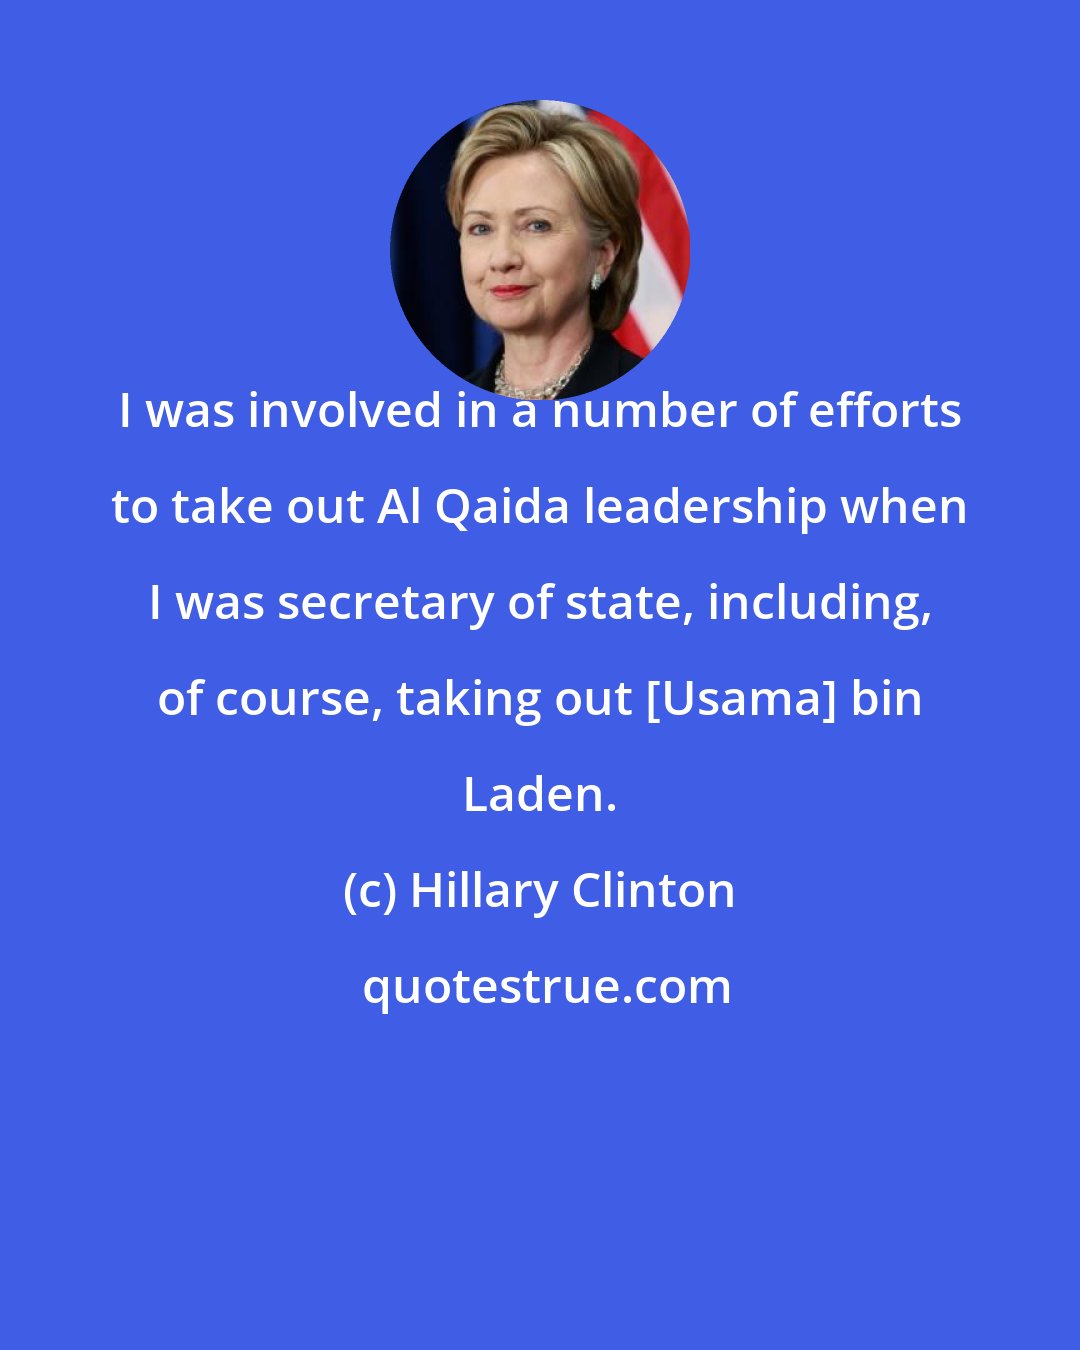 Hillary Clinton: I was involved in a number of efforts to take out Al Qaida leadership when I was secretary of state, including, of course, taking out [Usama] bin Laden.